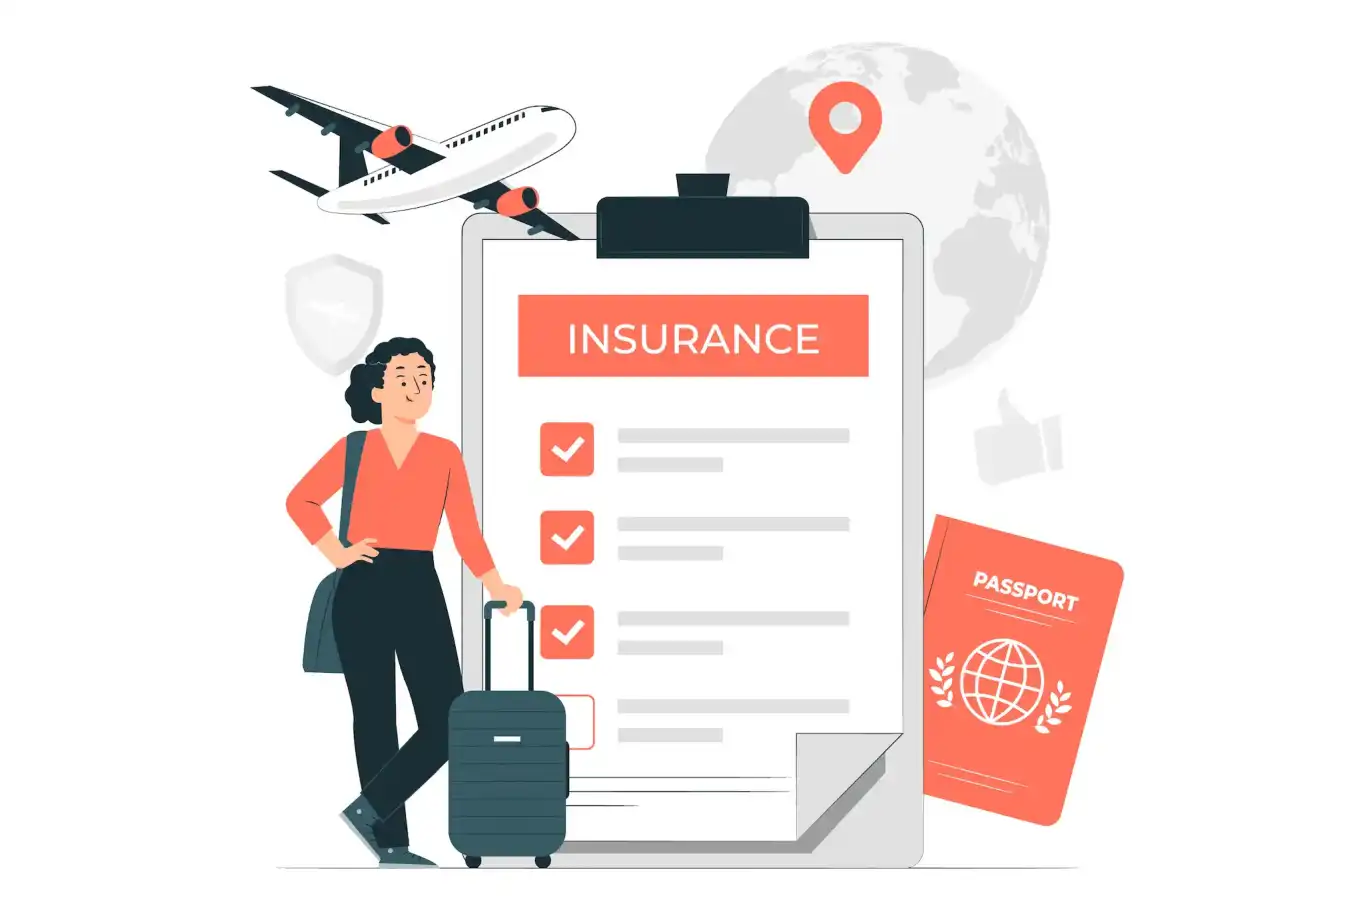 An illustration showing a happy traveler with travel insurance.